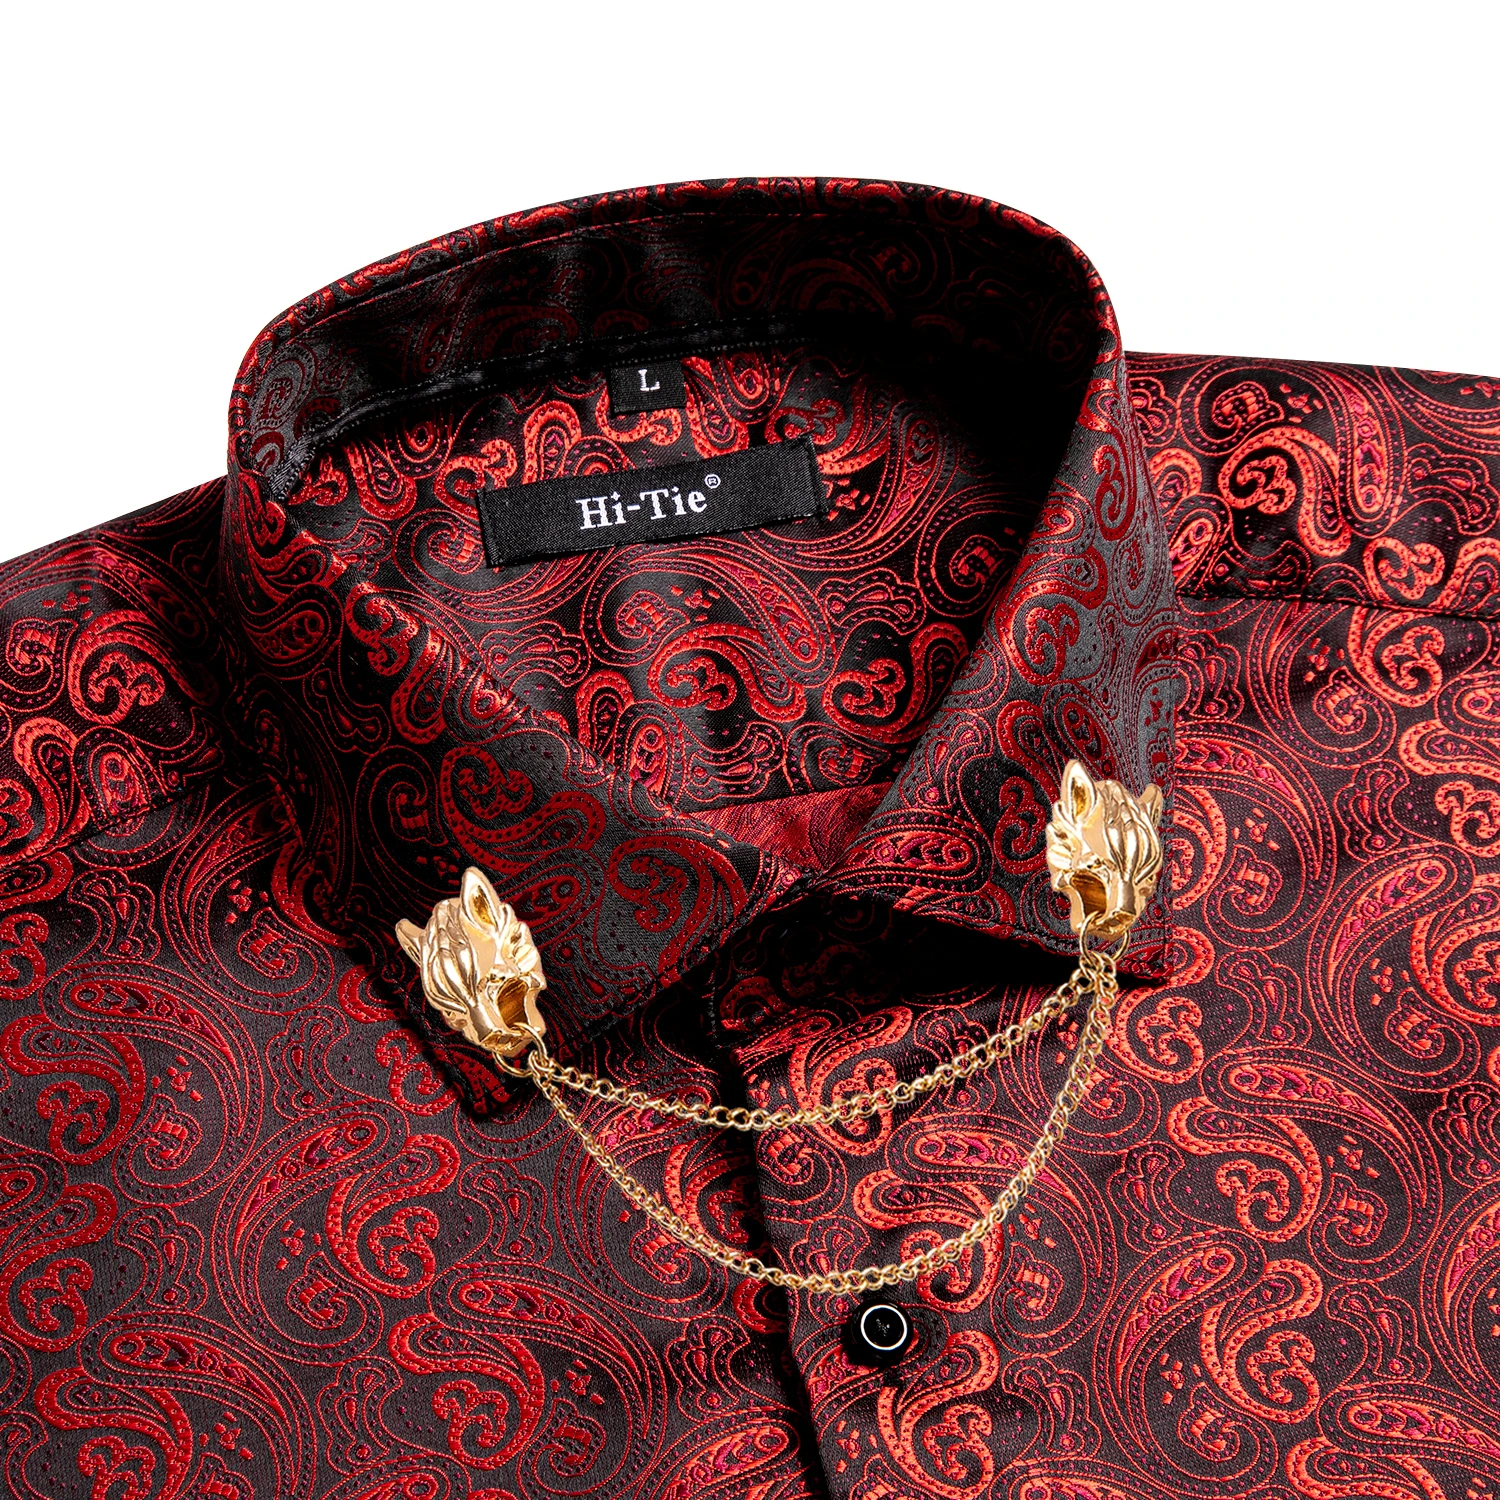 Hi-Tie Red Silk Mens Shirts Classic Paisley Lapel Long Sleeve Slim Fit High Quality Spring Autumn Shirt Male Business Party Gift barry wang luxury silk mens scarf floral paisley stylish burgundy gold black navy blue purple for male wedding business party